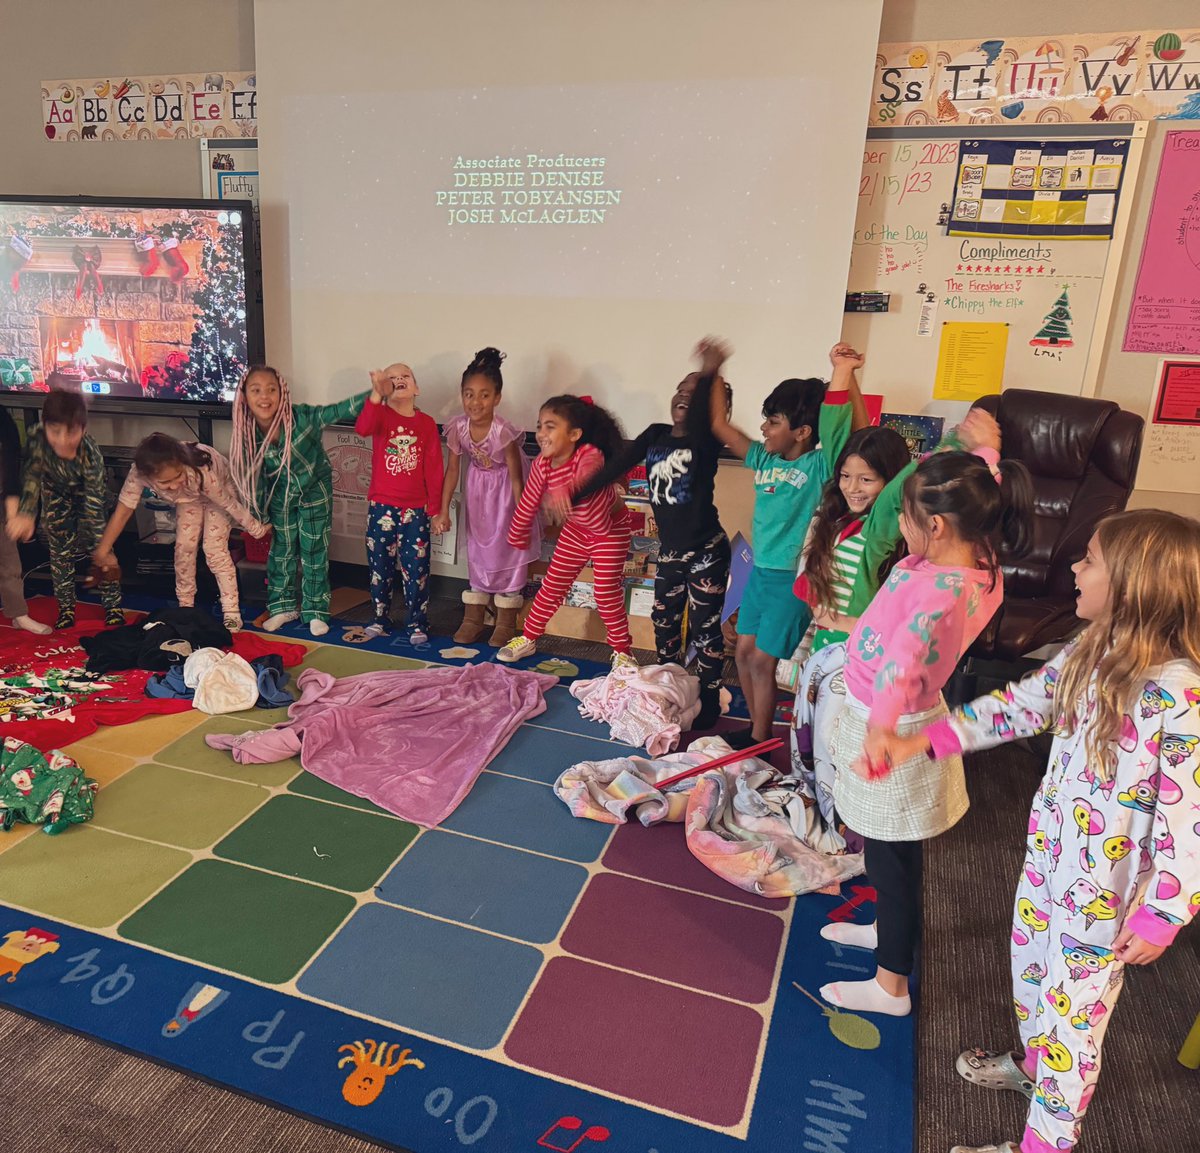 Polar Express Day is always one of my favs! Jammies, slippers, blankies, hot cocoa (with marshmallows of course), a classic movie & friends—can’t beat it. 🎬🚂☕️ #cardinalpride @HumbleISD_FCE @HumbleISD